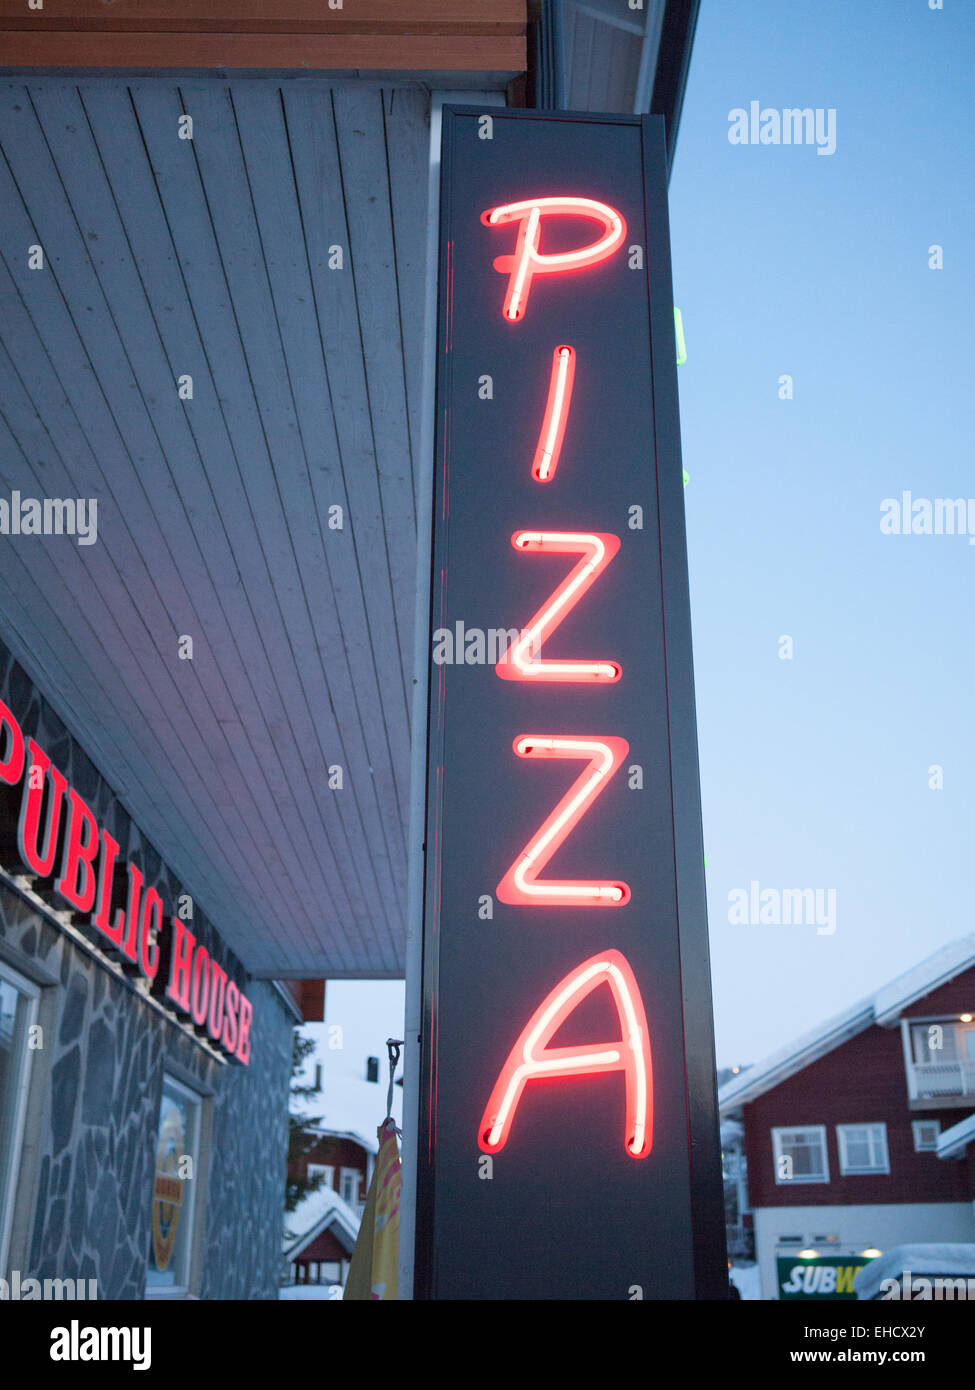 A neon sign advertising a pizza restaurant and takeaway in the ski resort of levi, Lapland, Finland Stock Photo